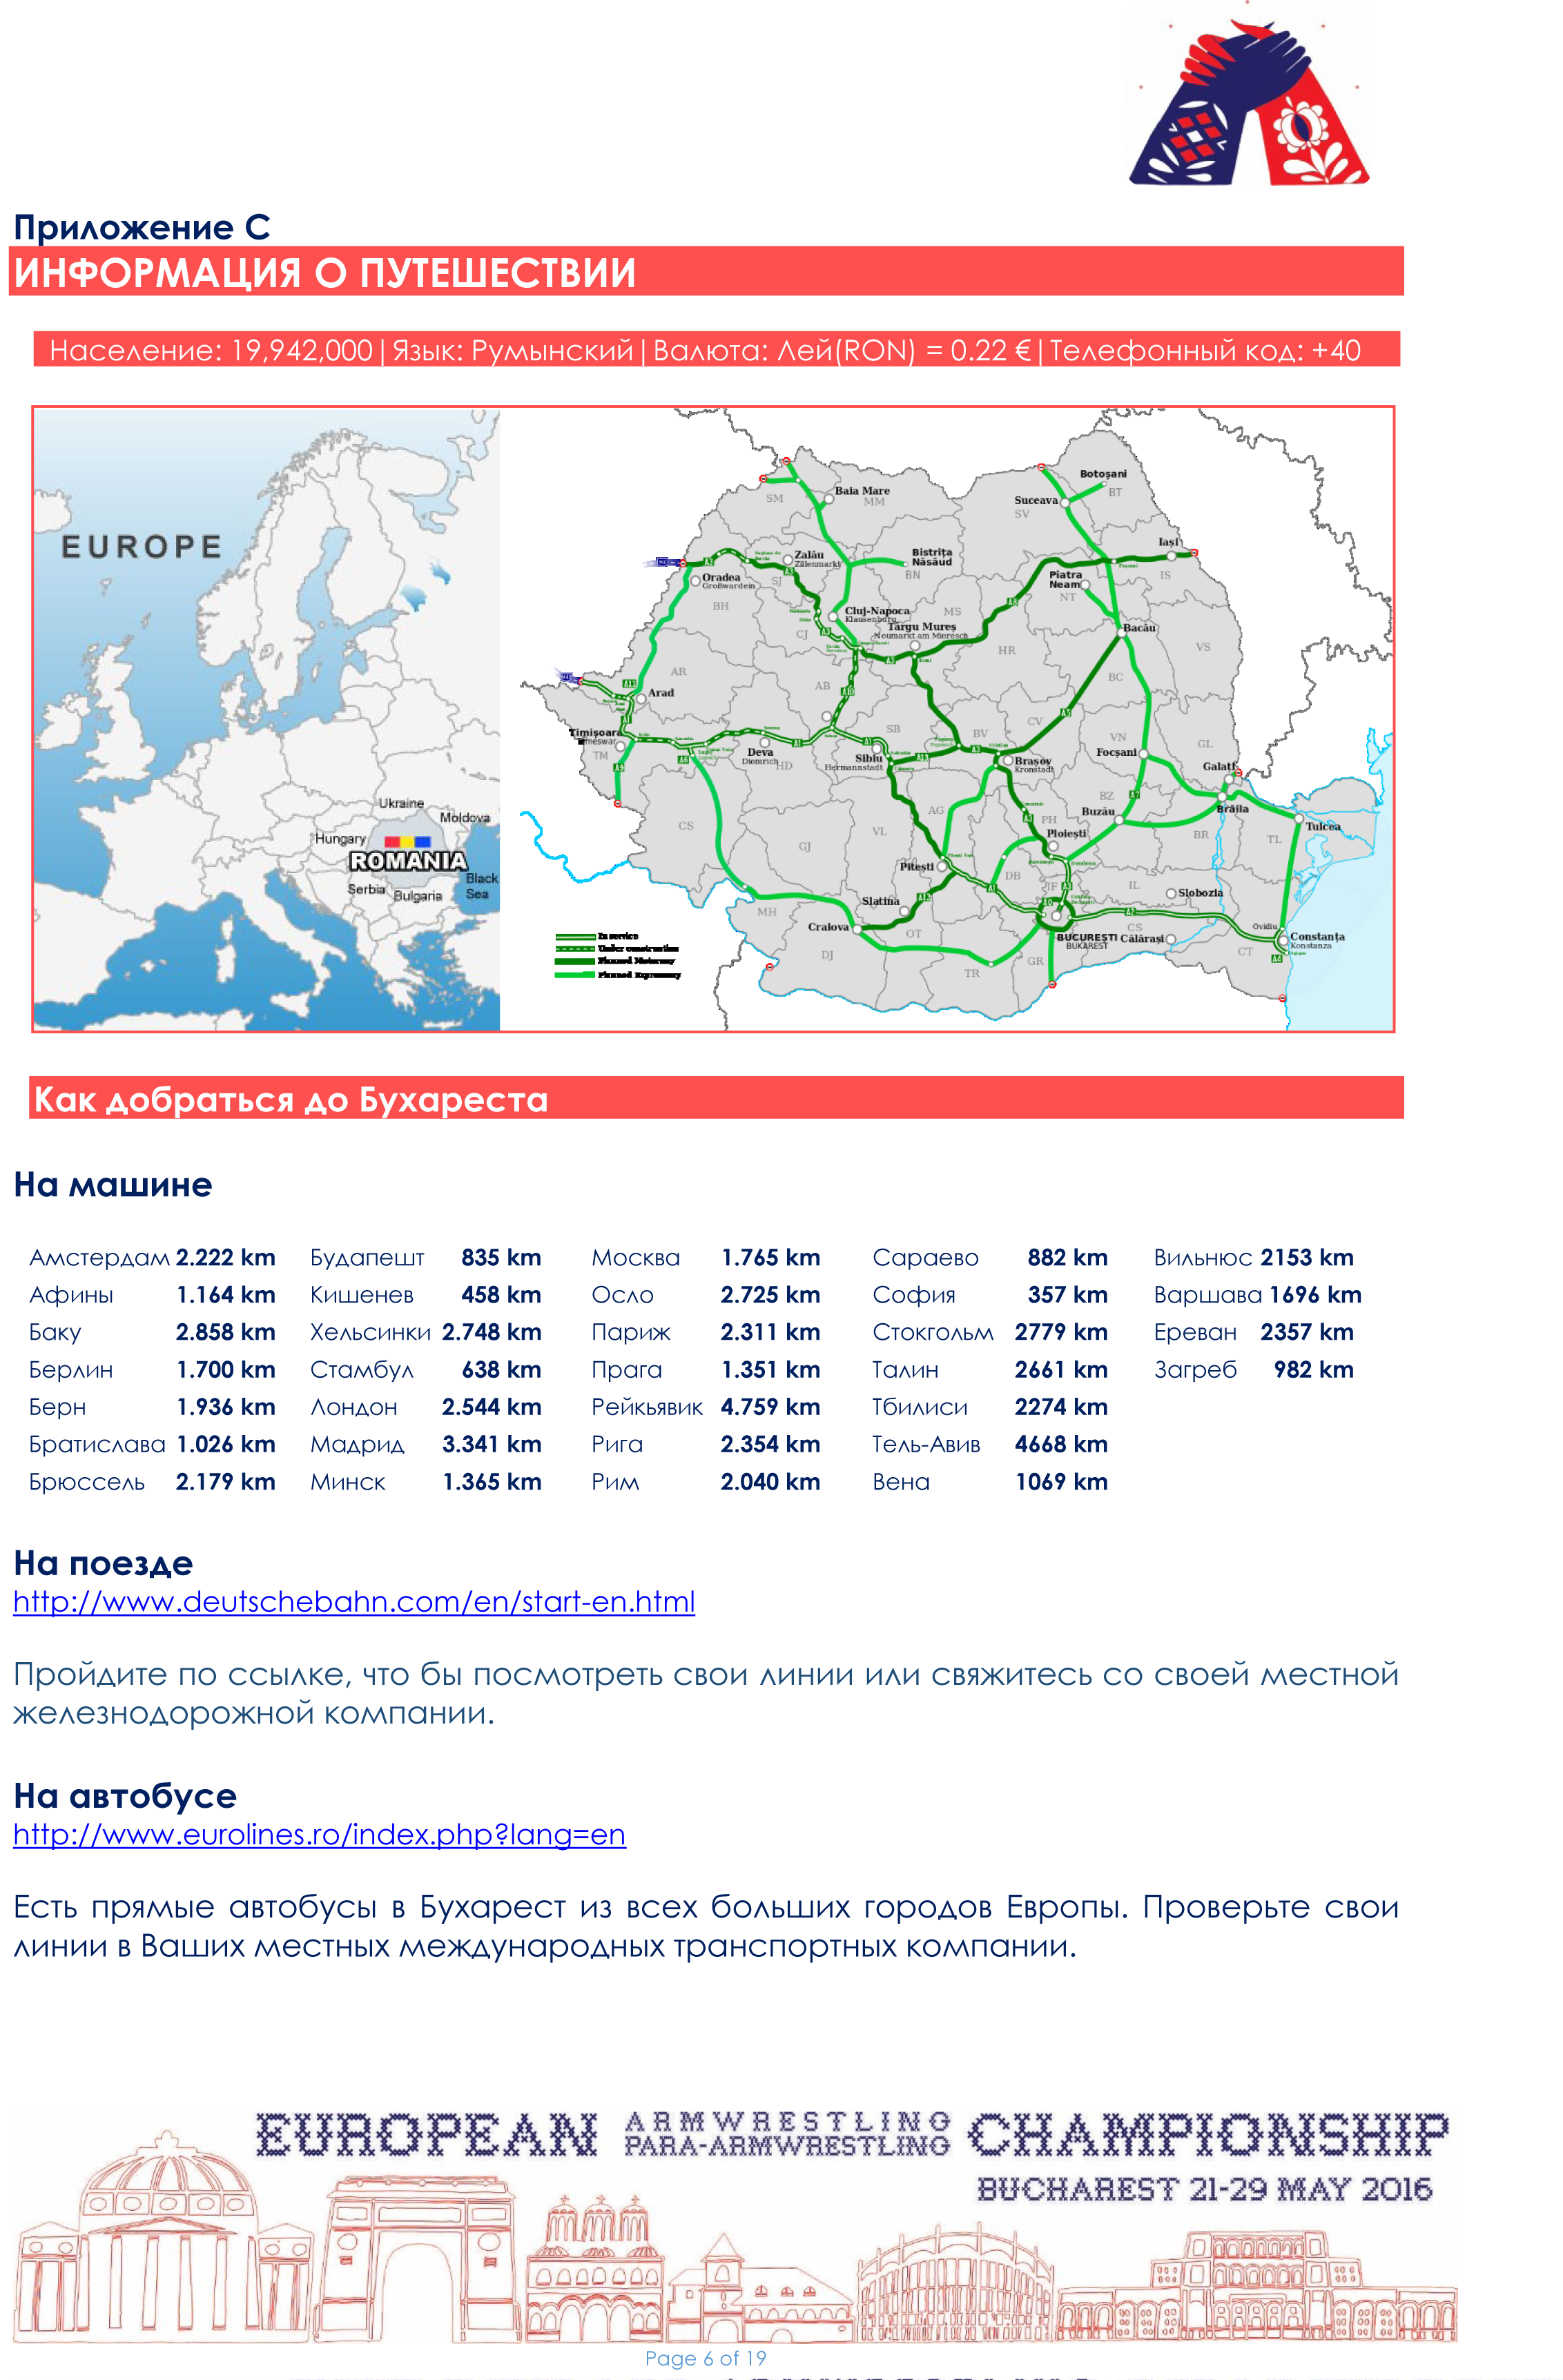 938168_euroarm-2016-packages-rus-6.png